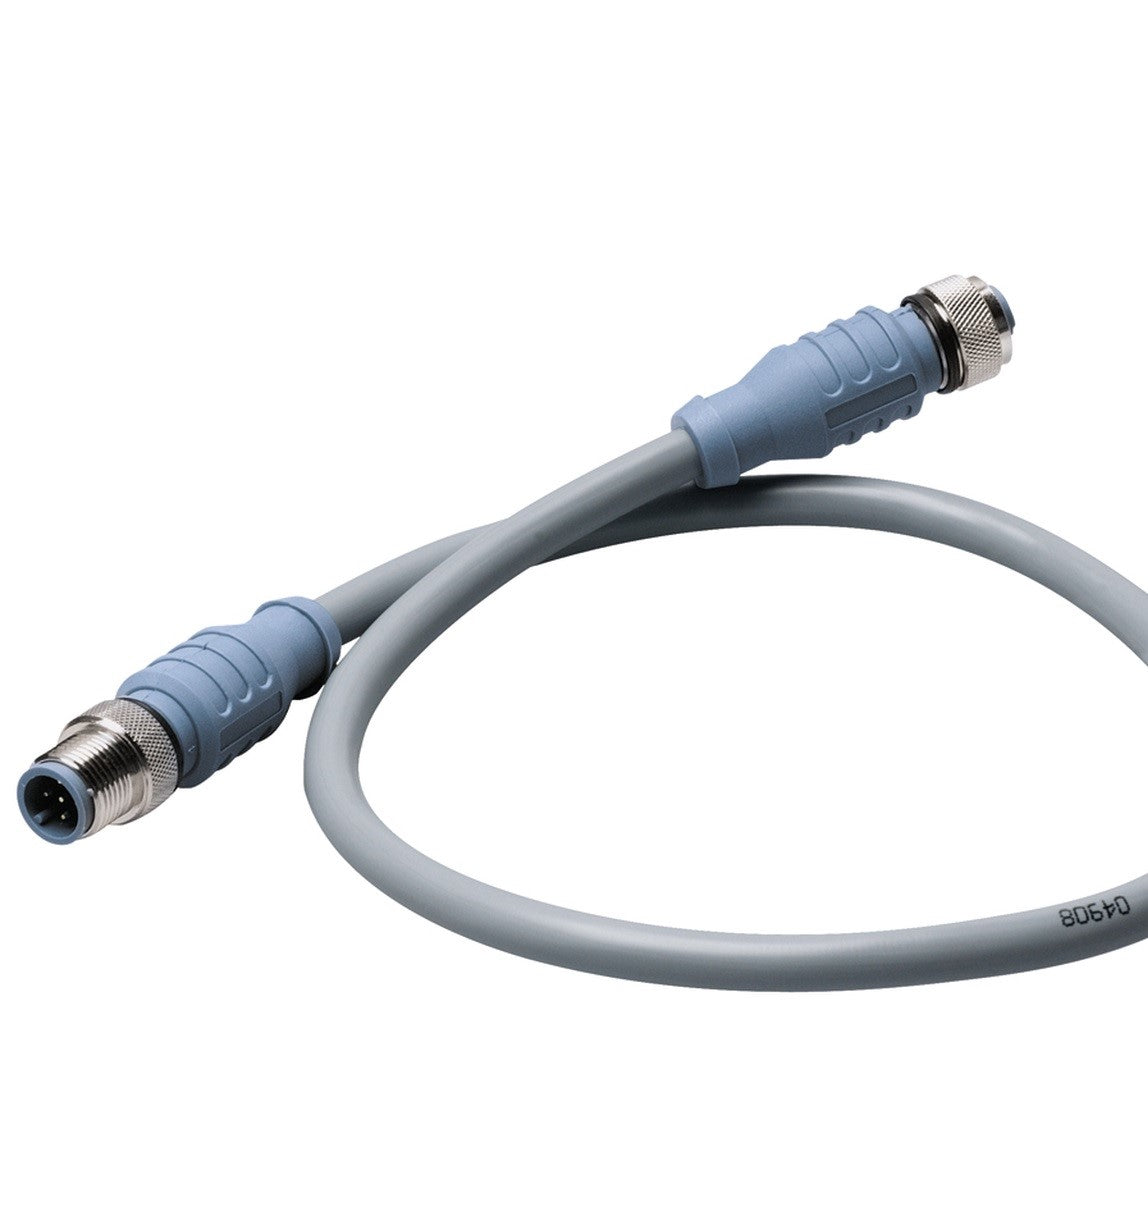 Maretron Micro Cable 4 Meter Male To Female Connectors